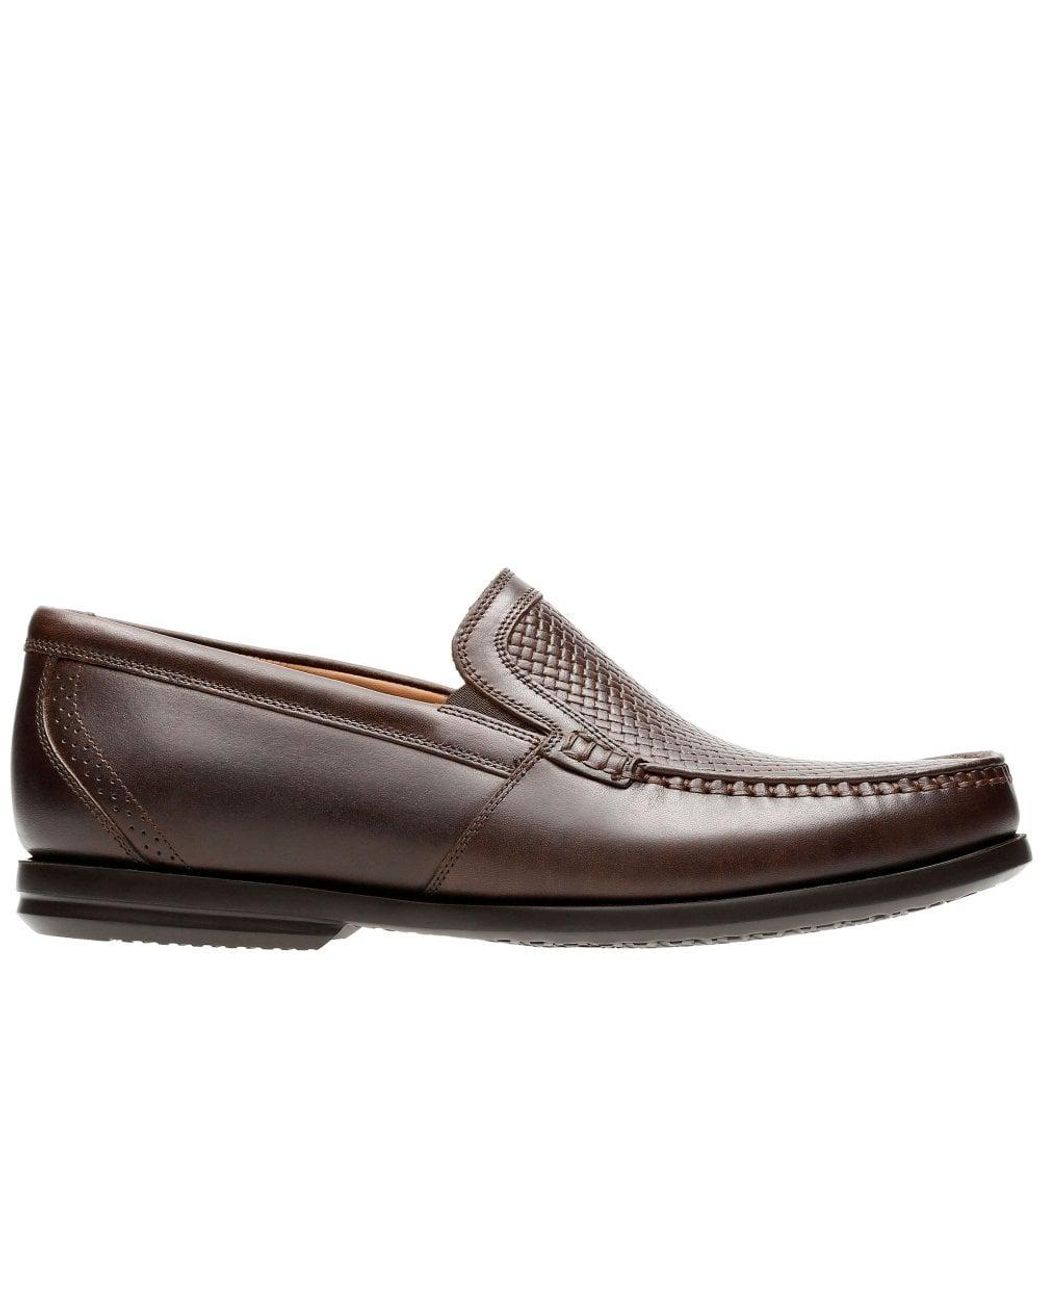 Clarks Un Gala Free Slip-on Loafer in Brown for Men | Lyst Canada